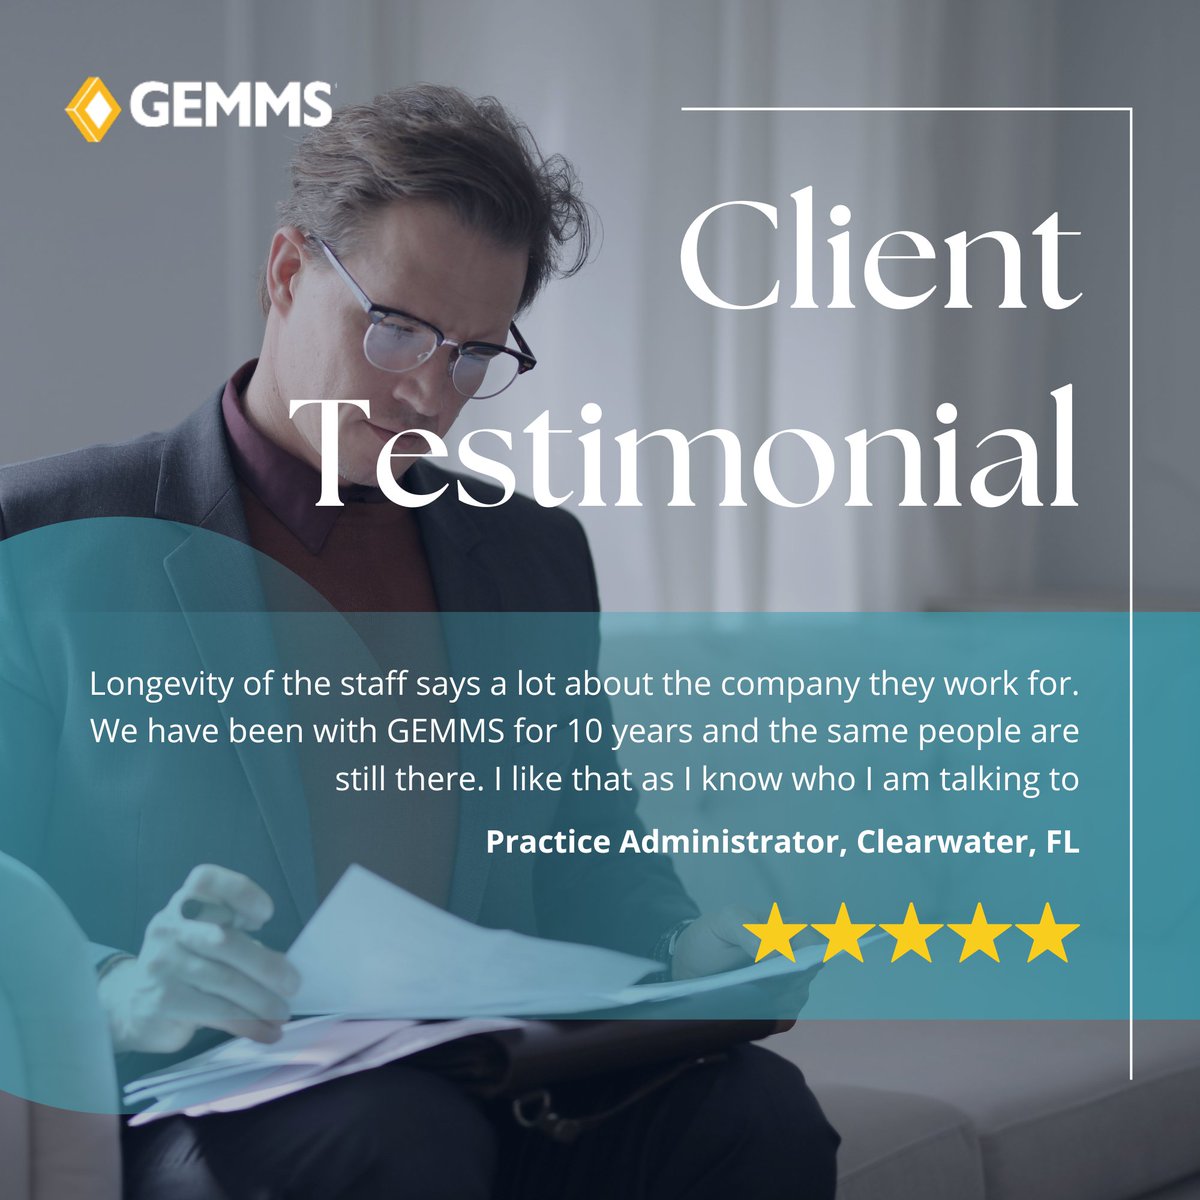 Our customers are at the heart of everything we do. Look at this testimonial to see how GEMMS One EHR software has made a difference in their practice.

#EHRsoftware #healthcaretechnology #practiceefficiency #GEMMSONE #Cardiology #Cardiologist #hearthealth